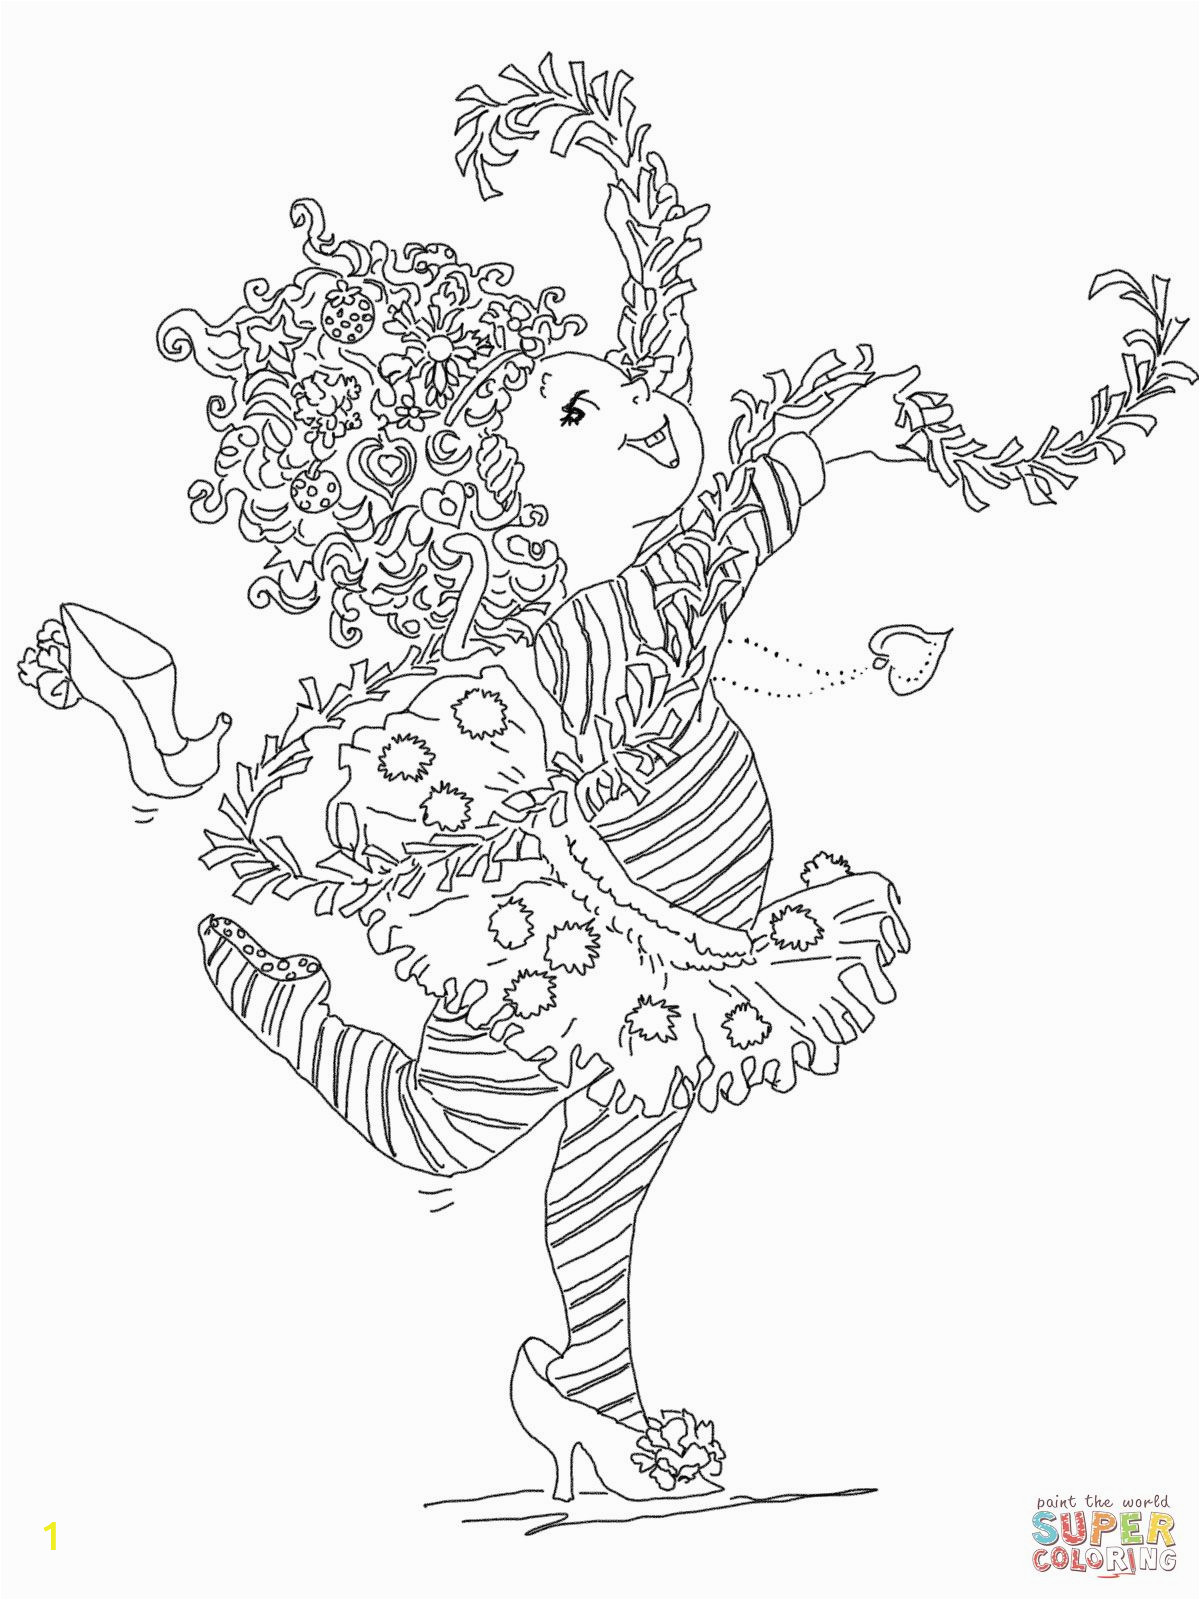 Fancy Nancy Coloring Pages to Print Fancy Nancy Super Coloring 3 Coloring Book